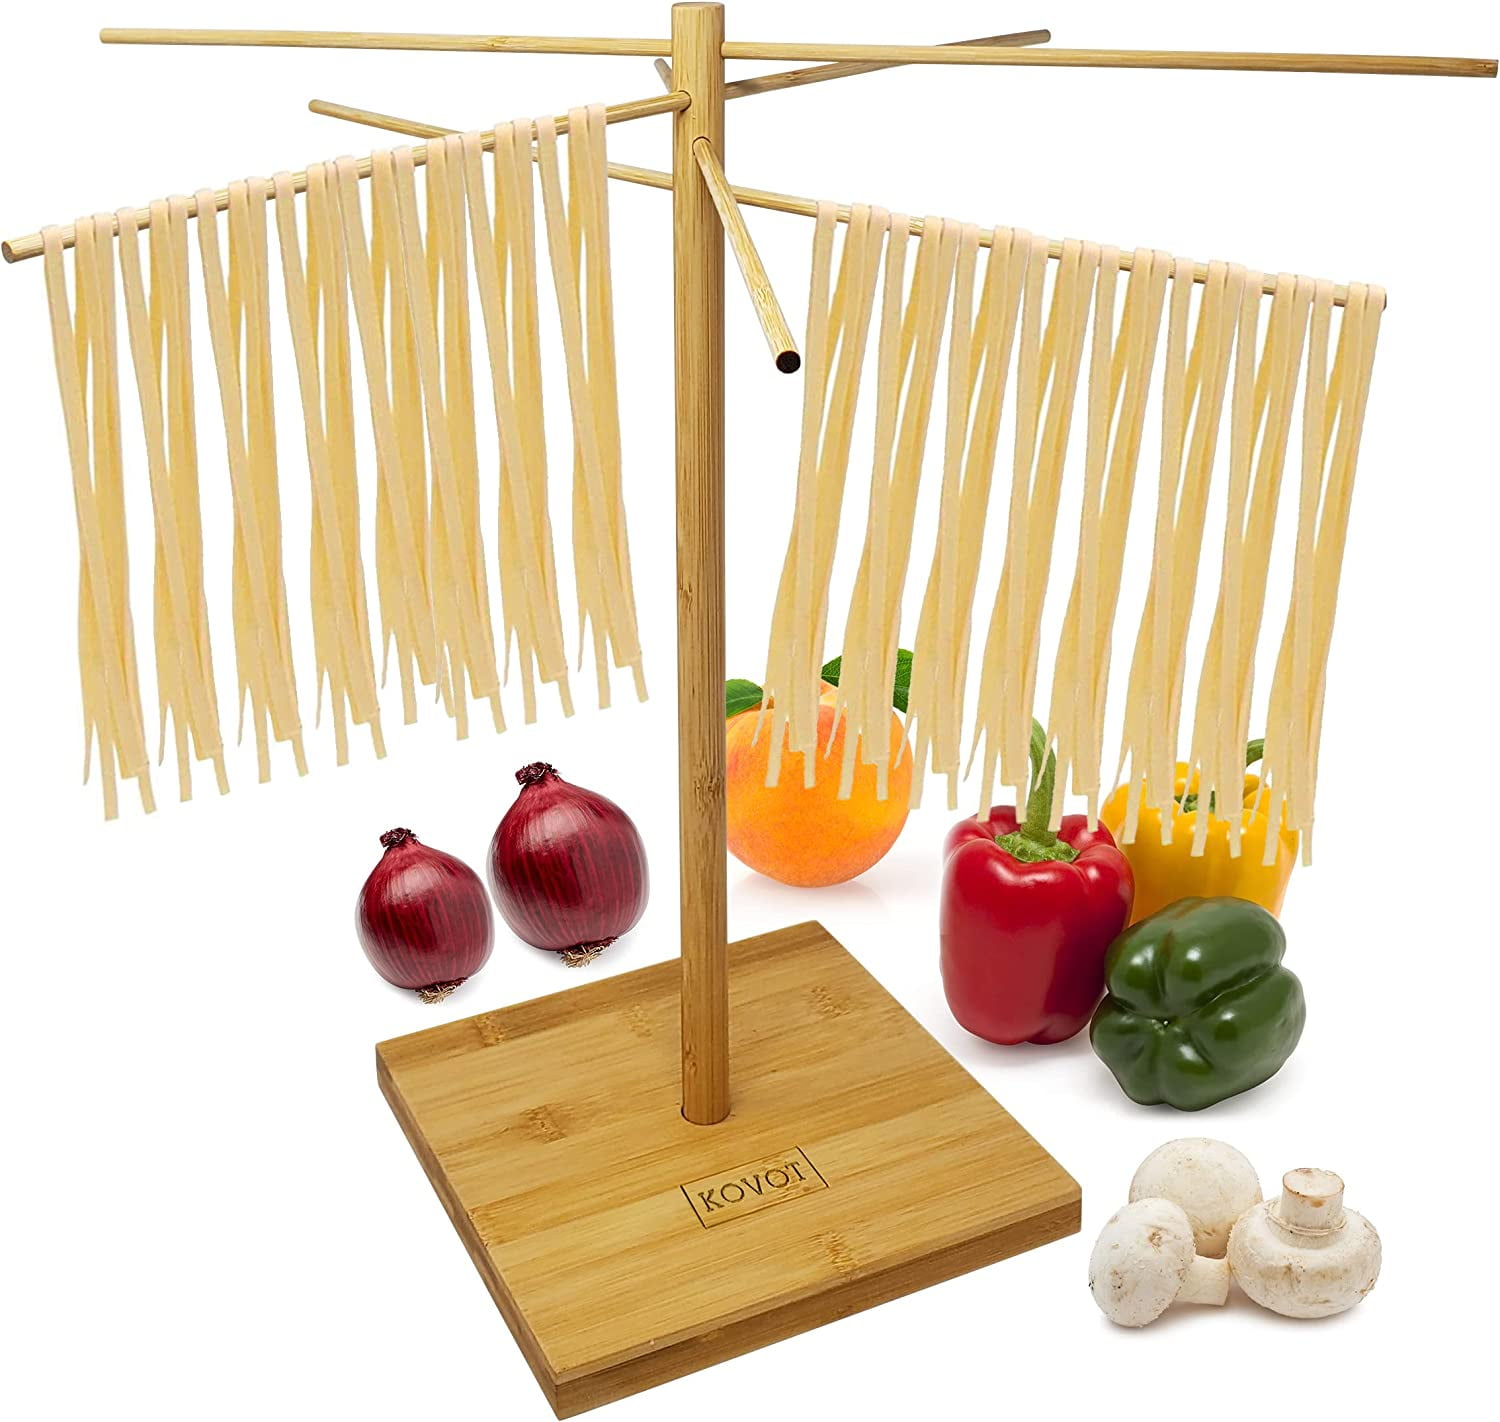 3D Printable WOODEN COLLAPSIBLE PASTA & SPAGHETTI DRYING RACK by